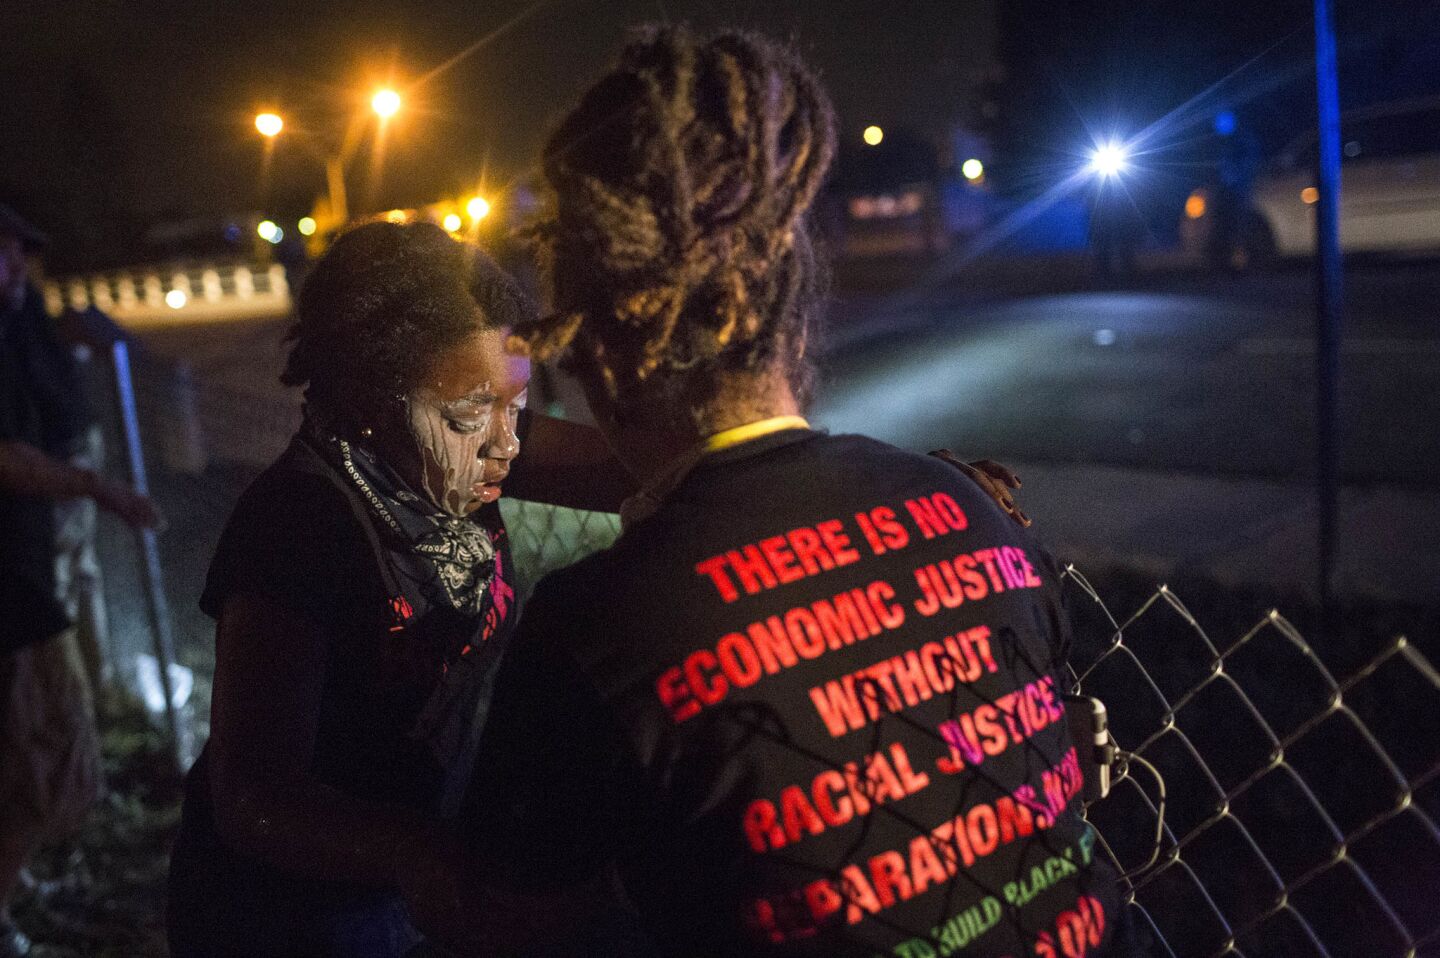 A protester uses milk to wash tear gas from her eyes after police used the gas to clear demonstrators who were blocking Interstate 277 in Charlotte, N.C., on Thursday.